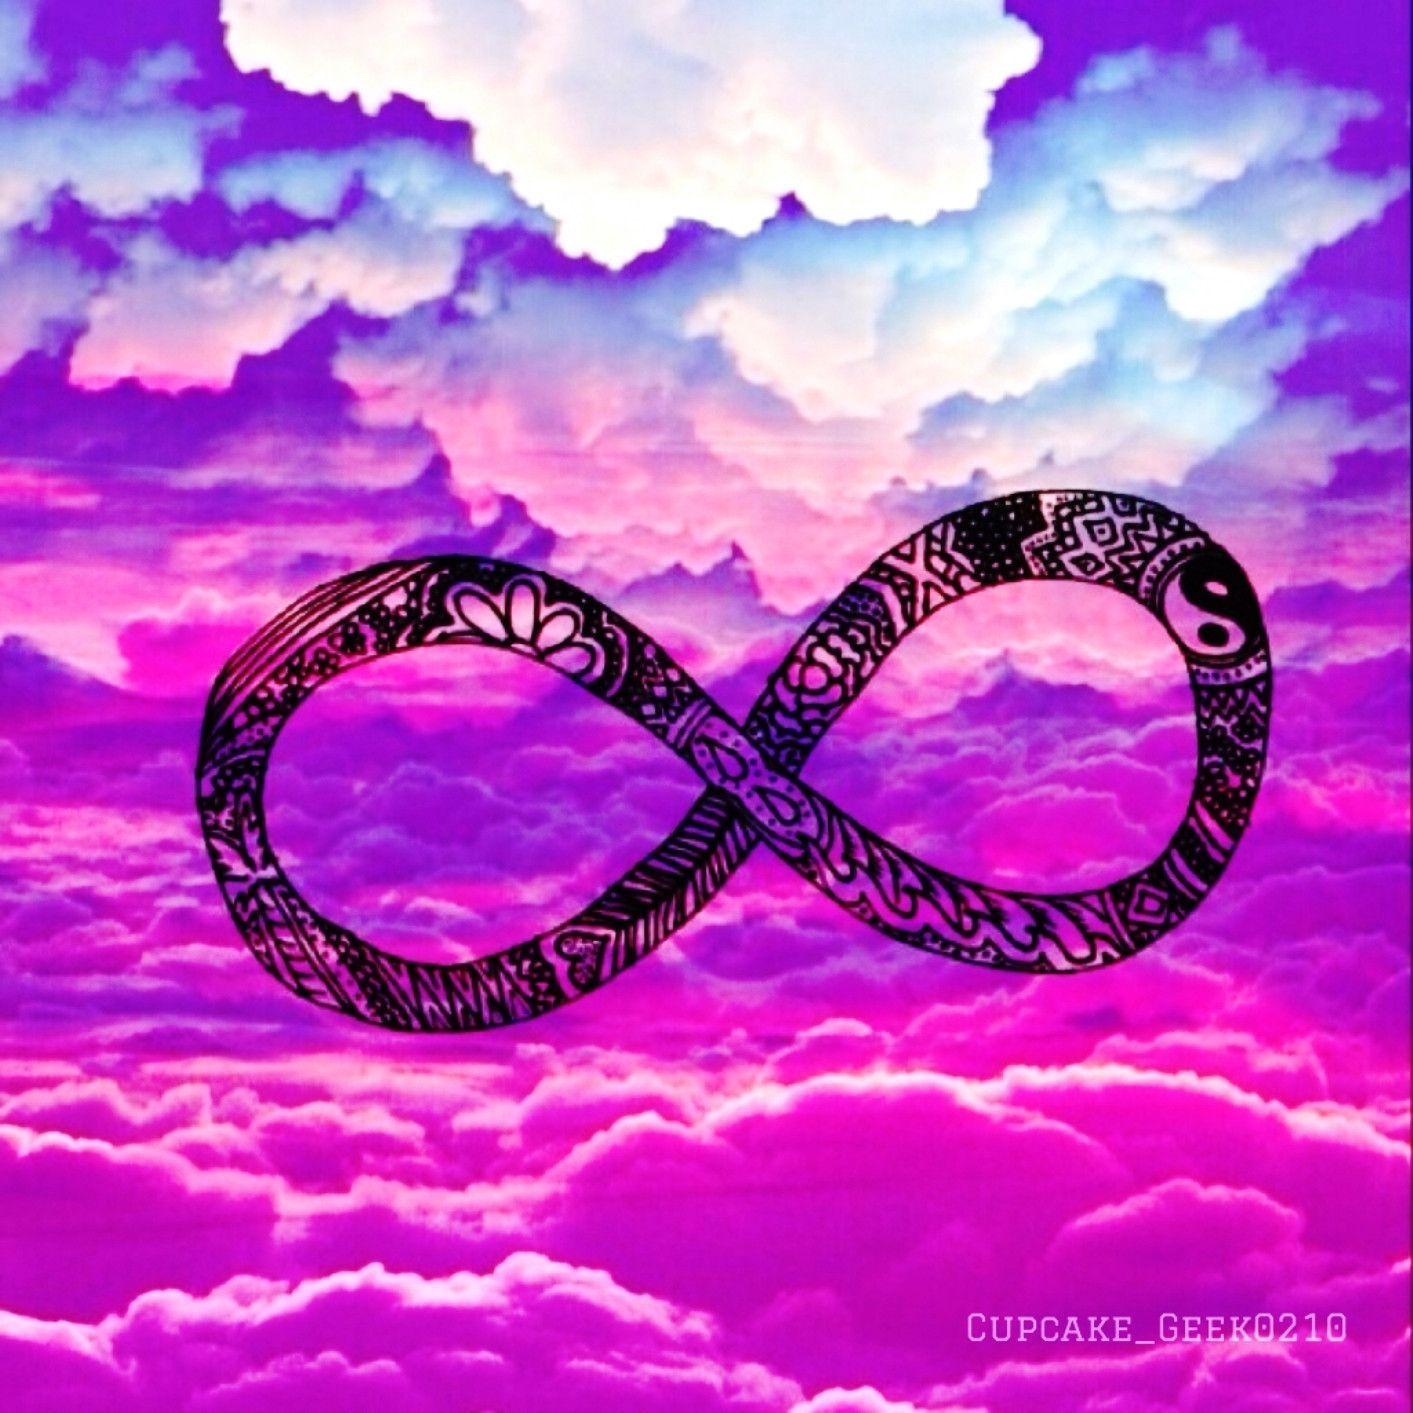 Cute Infinity Wallpapers - Top Free Cute Infinity Backgrounds ...